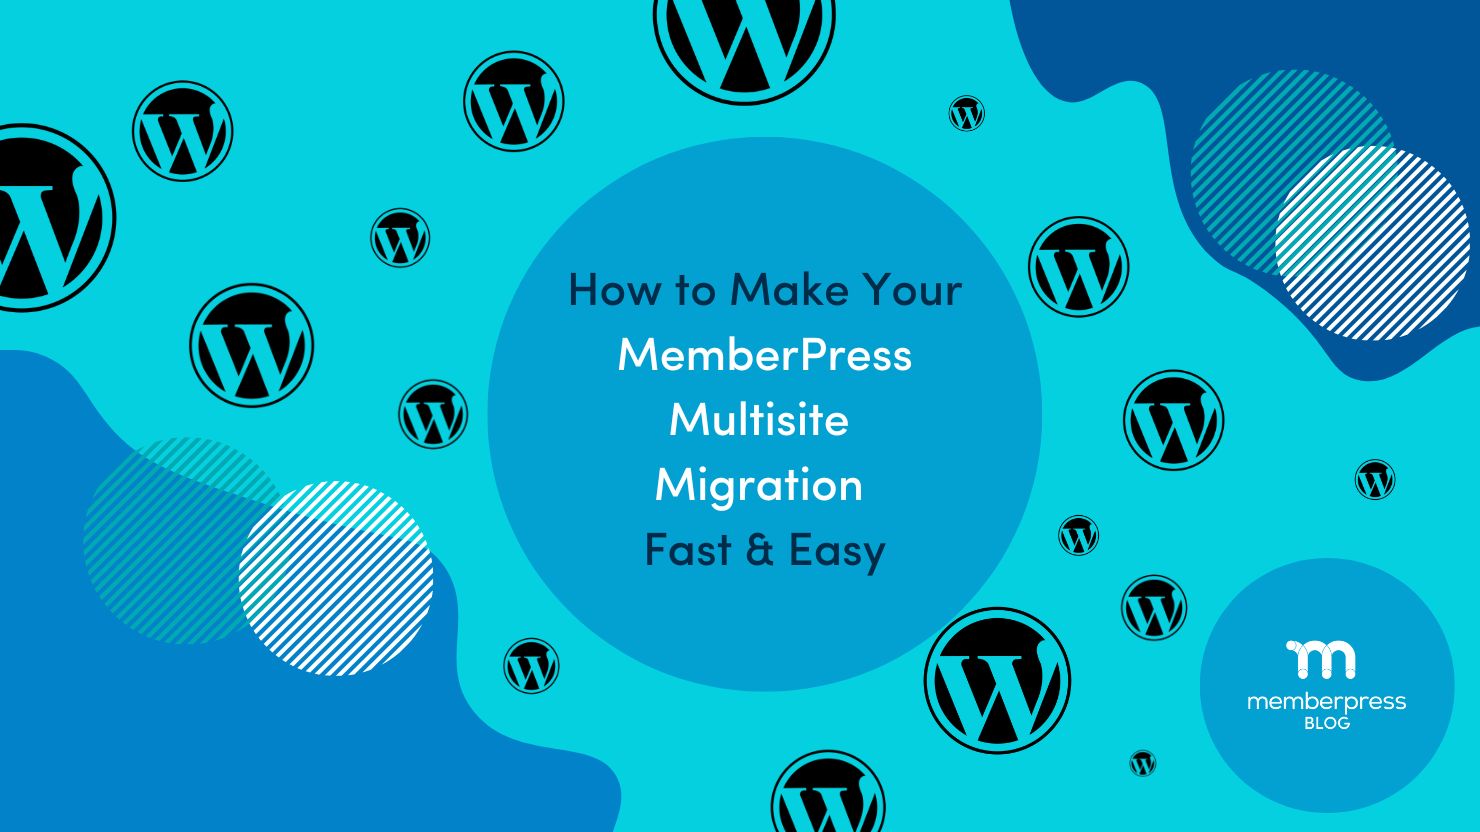 How to make your MemberPress WordPress multisite migration fast and easy